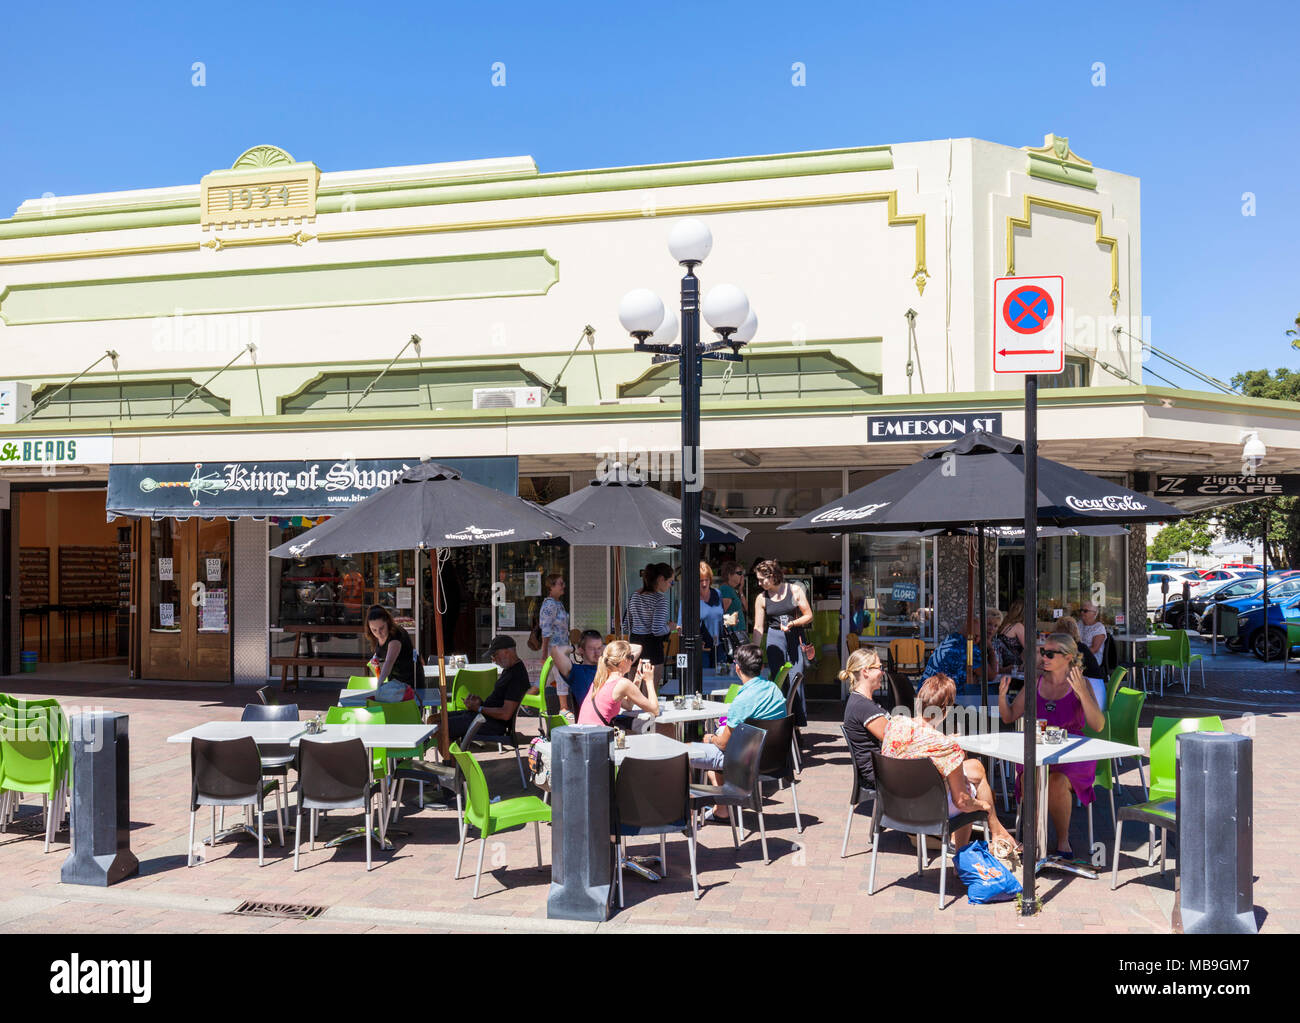 new zealand napier new zealand the art deco architecture of Napier town centre shops and street cafes emerson street napier new zealand north island Stock Photo